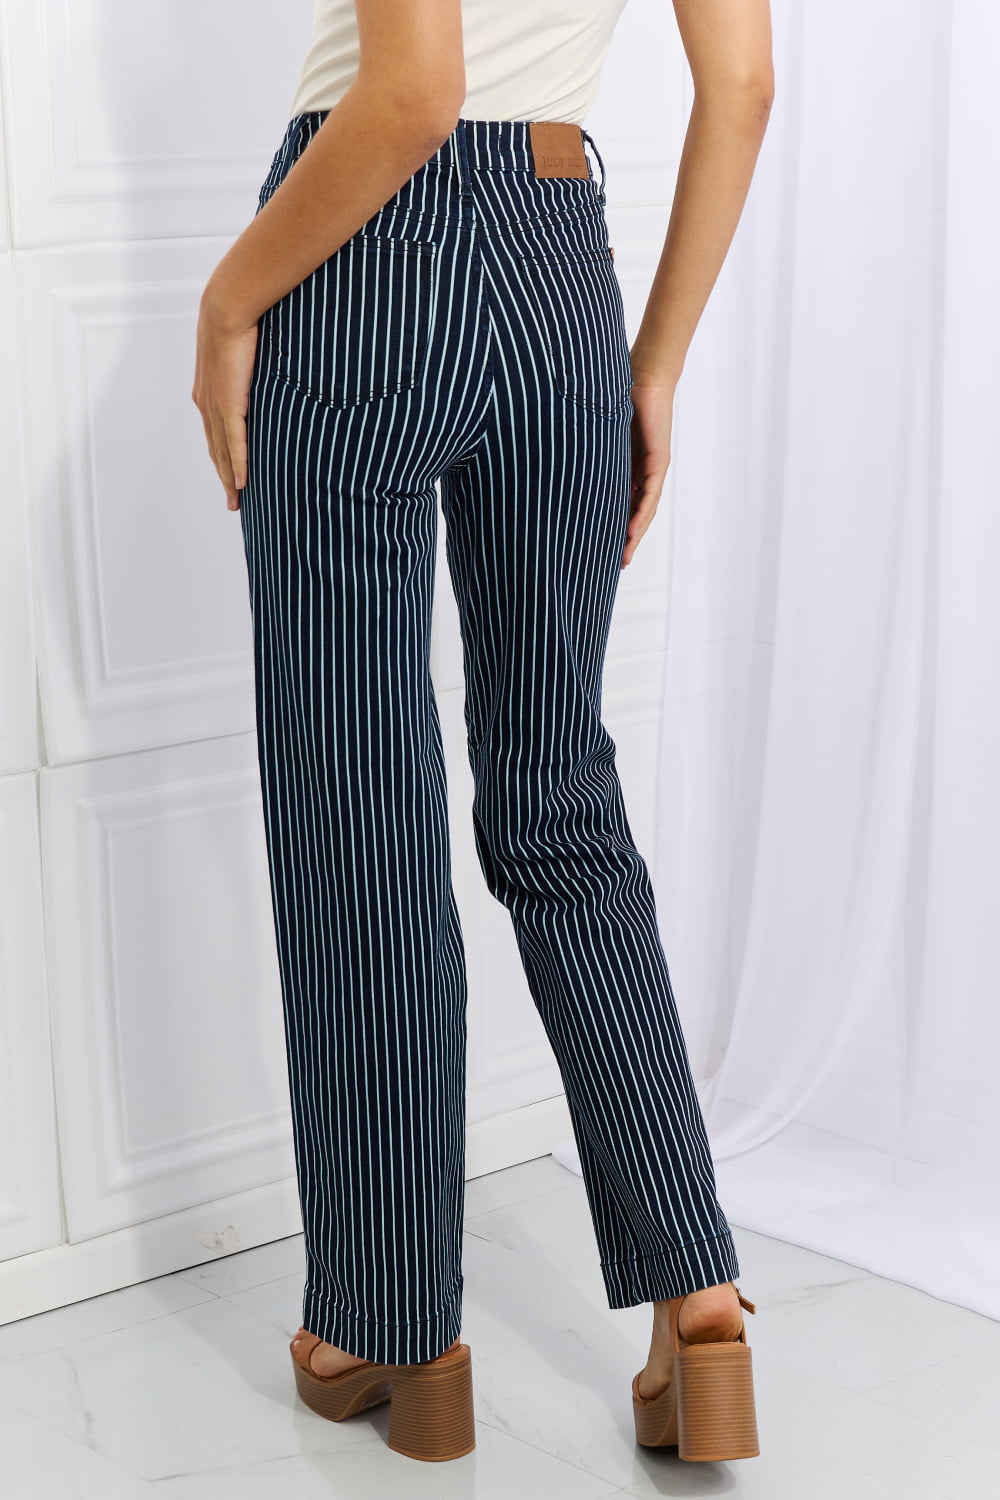 Women's Summer/Spring Casual Vintage High Waist Striped Pants | Striped  pants women, Pants for women, Women pants size chart